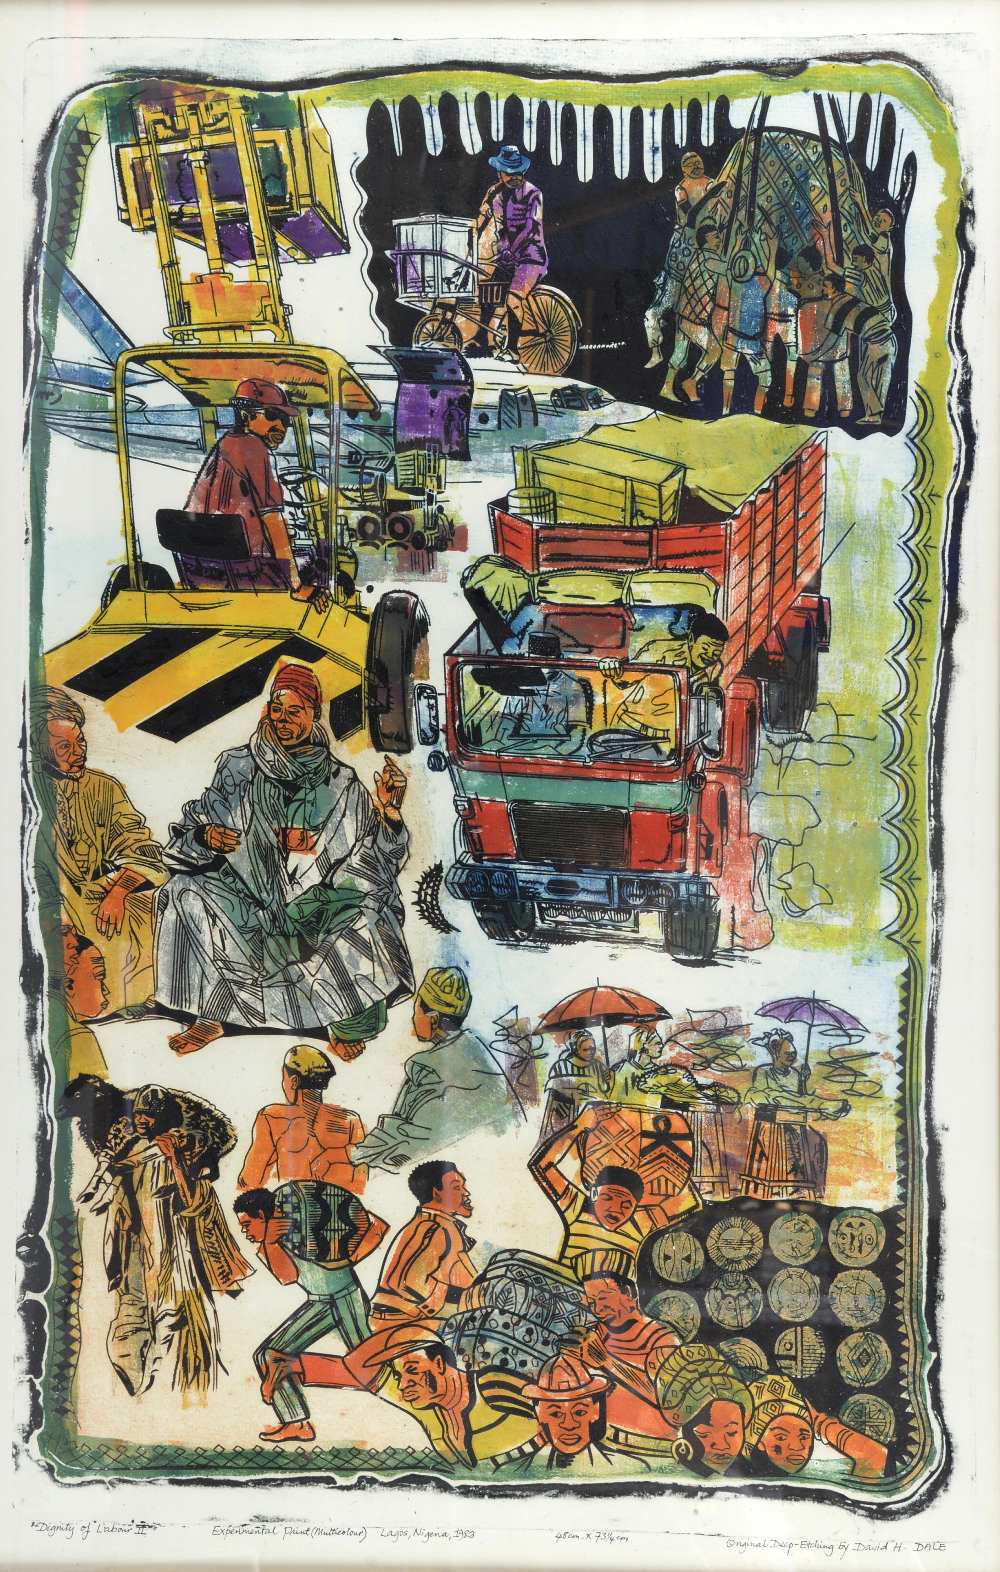 David H Dale, 'Dignity of Labour II', Lagos, Nigeria 1983, artist's proof (multicolour), signed, - Image 3 of 3